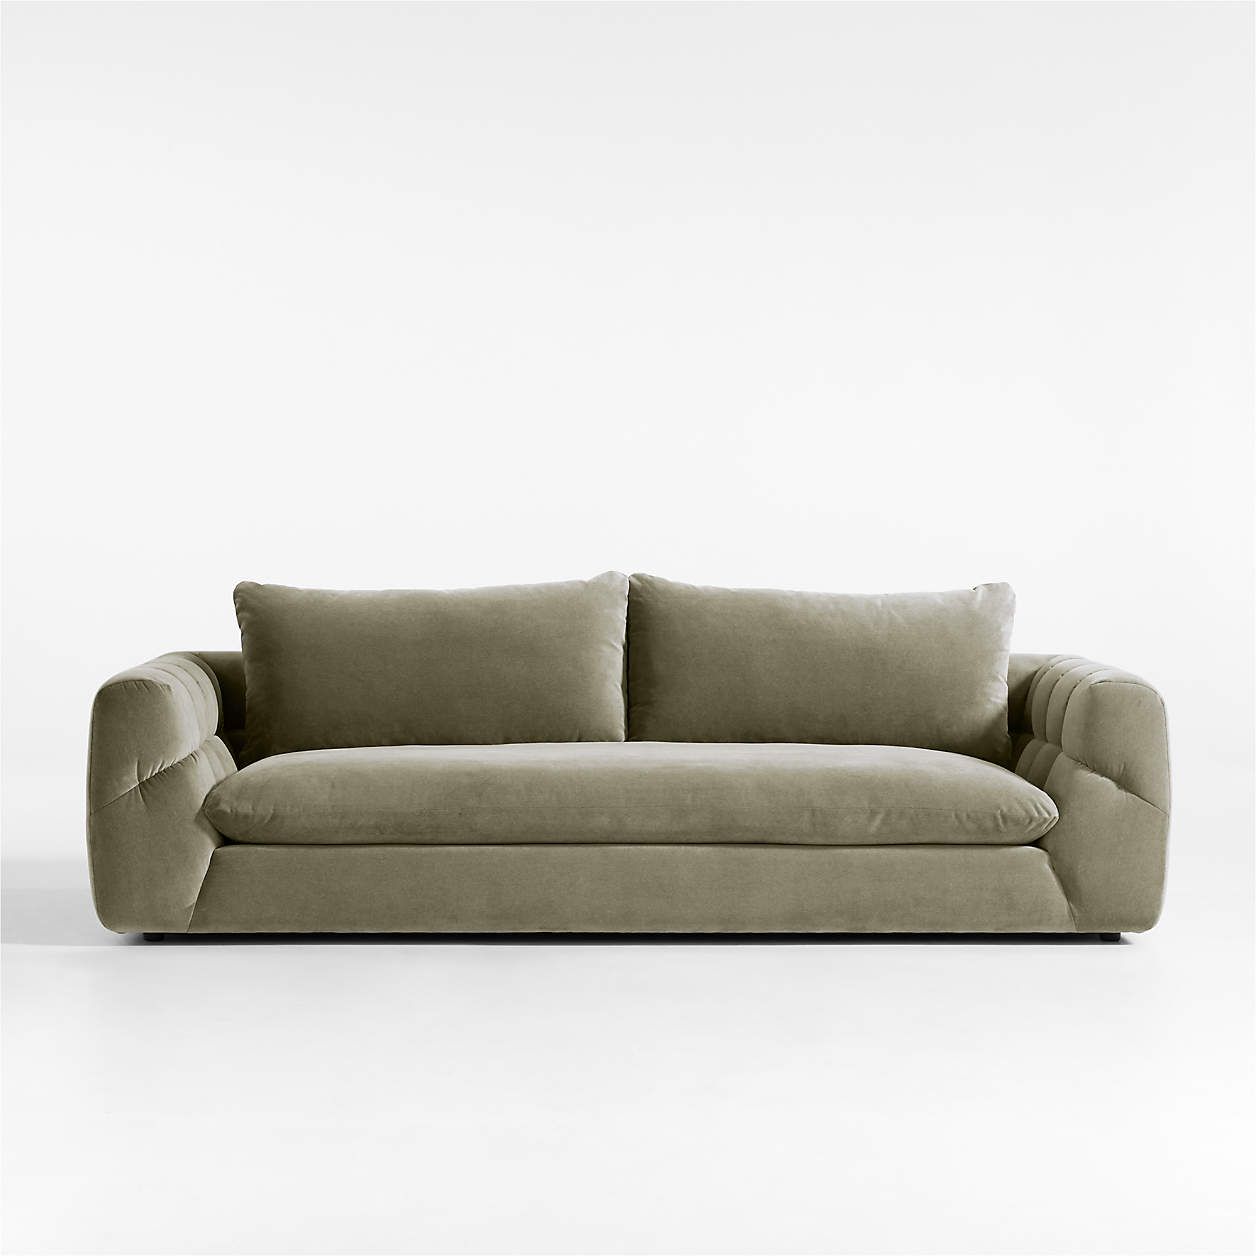 Cambria Olive Green Velvet Deep-Seat Sofa with Tufted Arms 96" | Crate & Barrel | Crate & Barrel